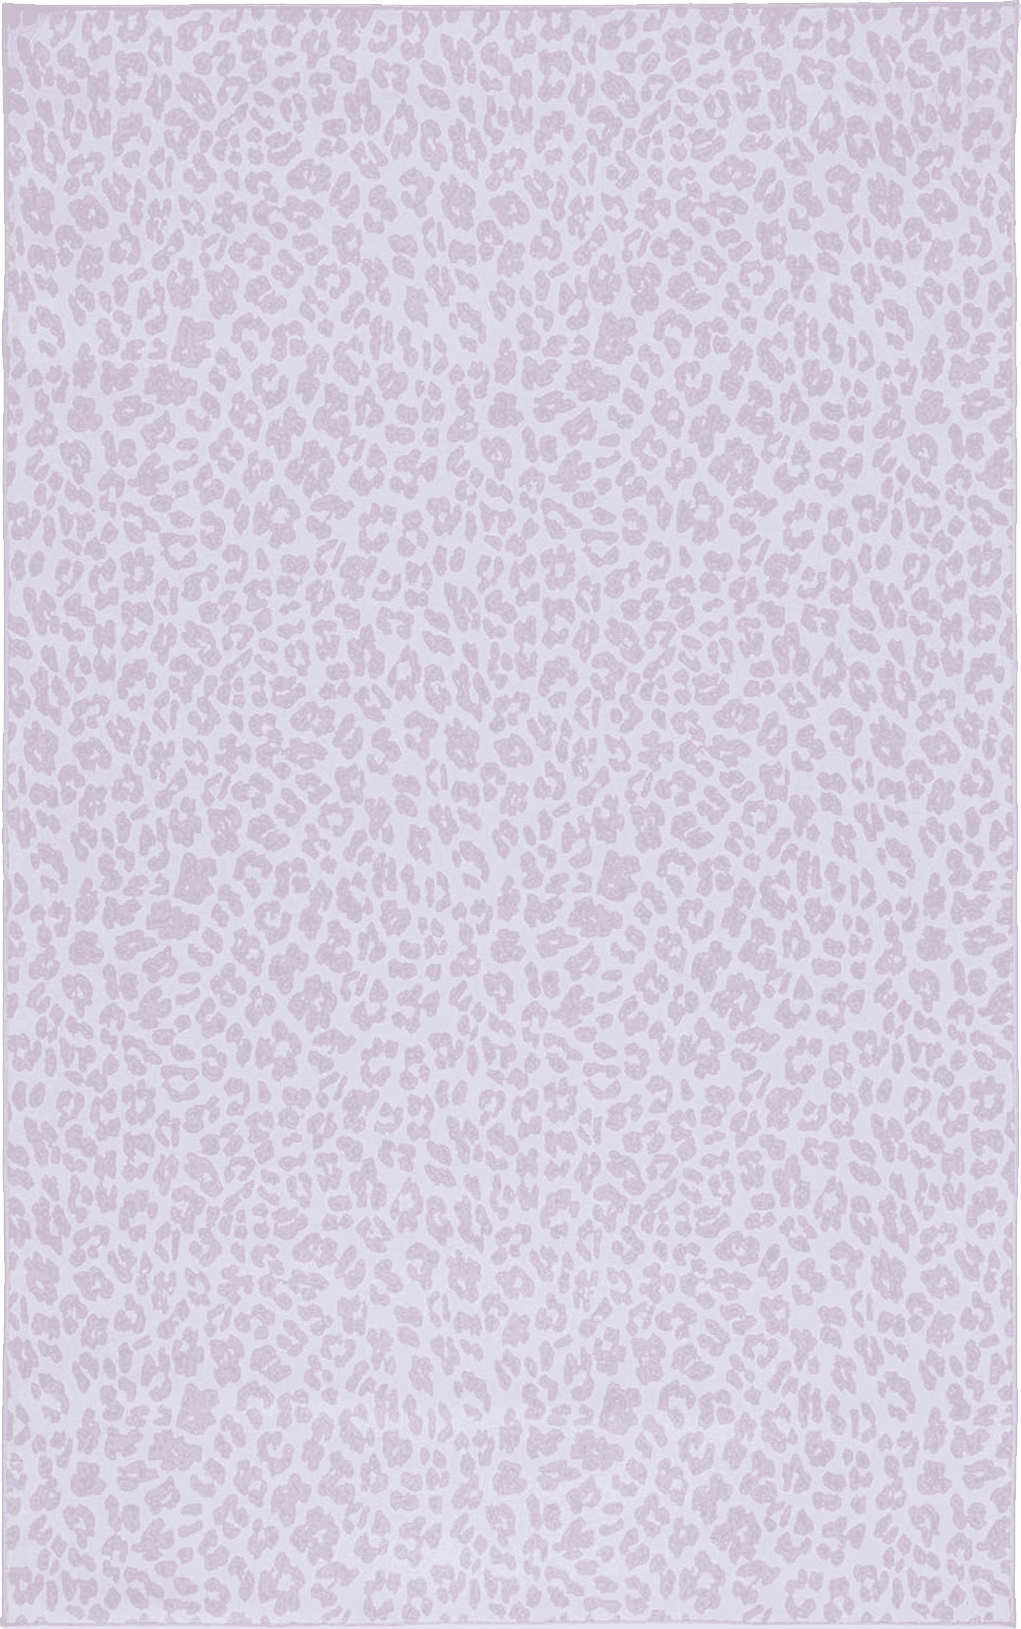 Area Pink Safavieh Faux Hide Collection Area Rug - 5' x 8', Ivory & Pink, Leopard Rustic Design, Non-Shedding & Easy Care, Machine Washable Ideal for High Traffic Areas in Living Room, Bedroom (FAH505B)